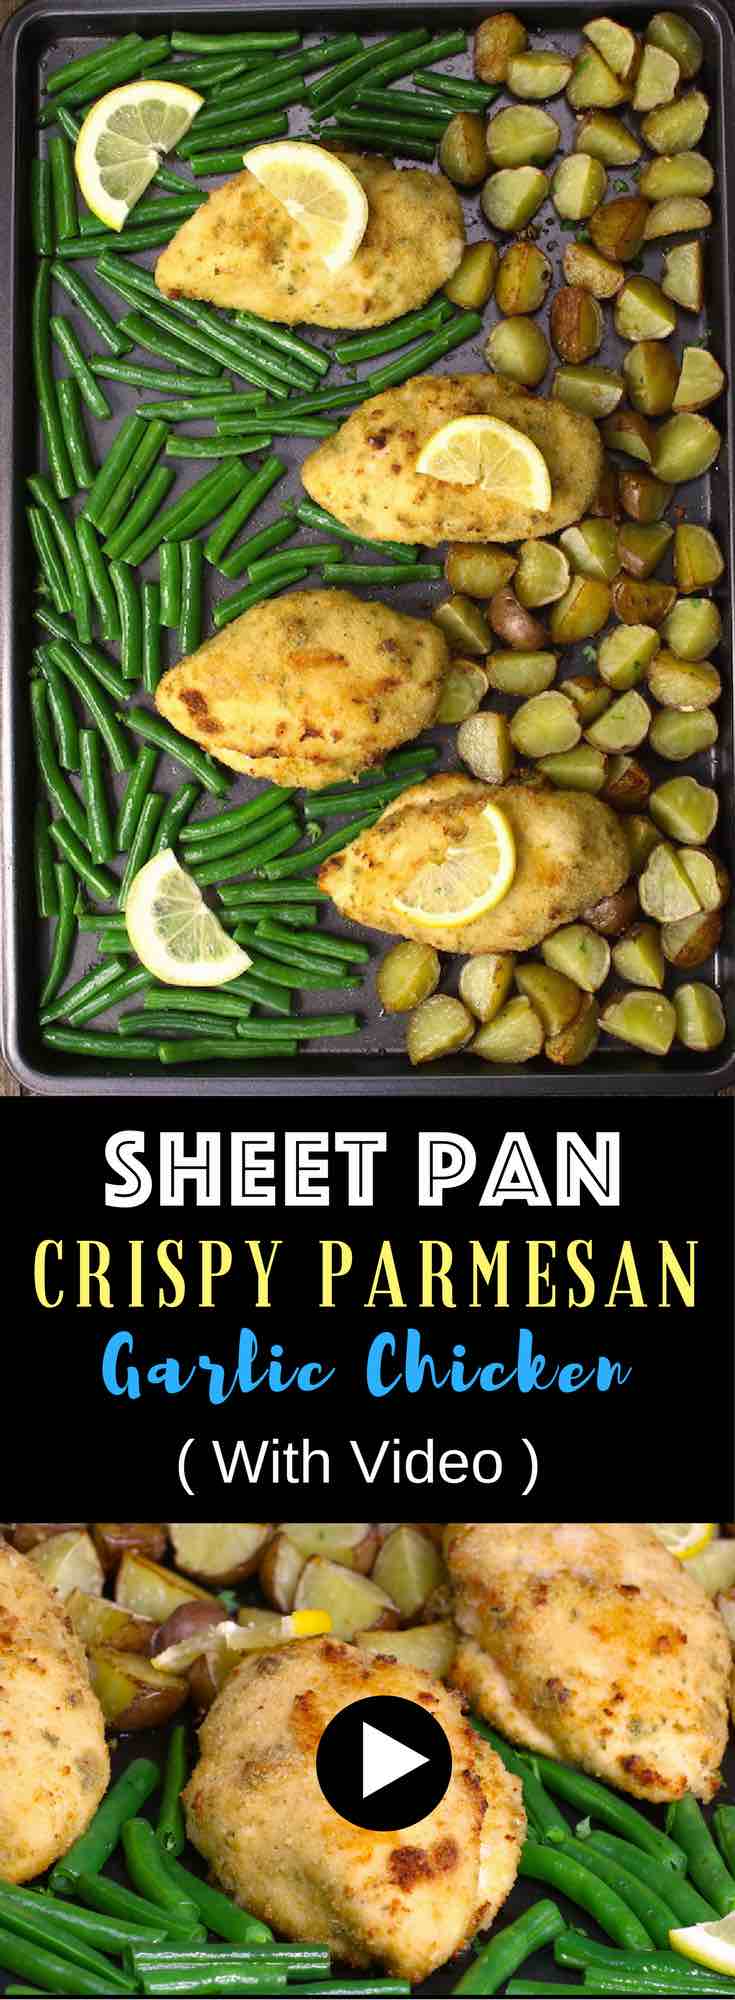 This Sheet Pan Chicken and Veggies is an easy dinner idea made with chicken breasts, potatoes and green beans. The chicken has a garlic parmesan crust that becomes crispy in the oven! So good and ready in 30 minutes. #sheetpanchicken